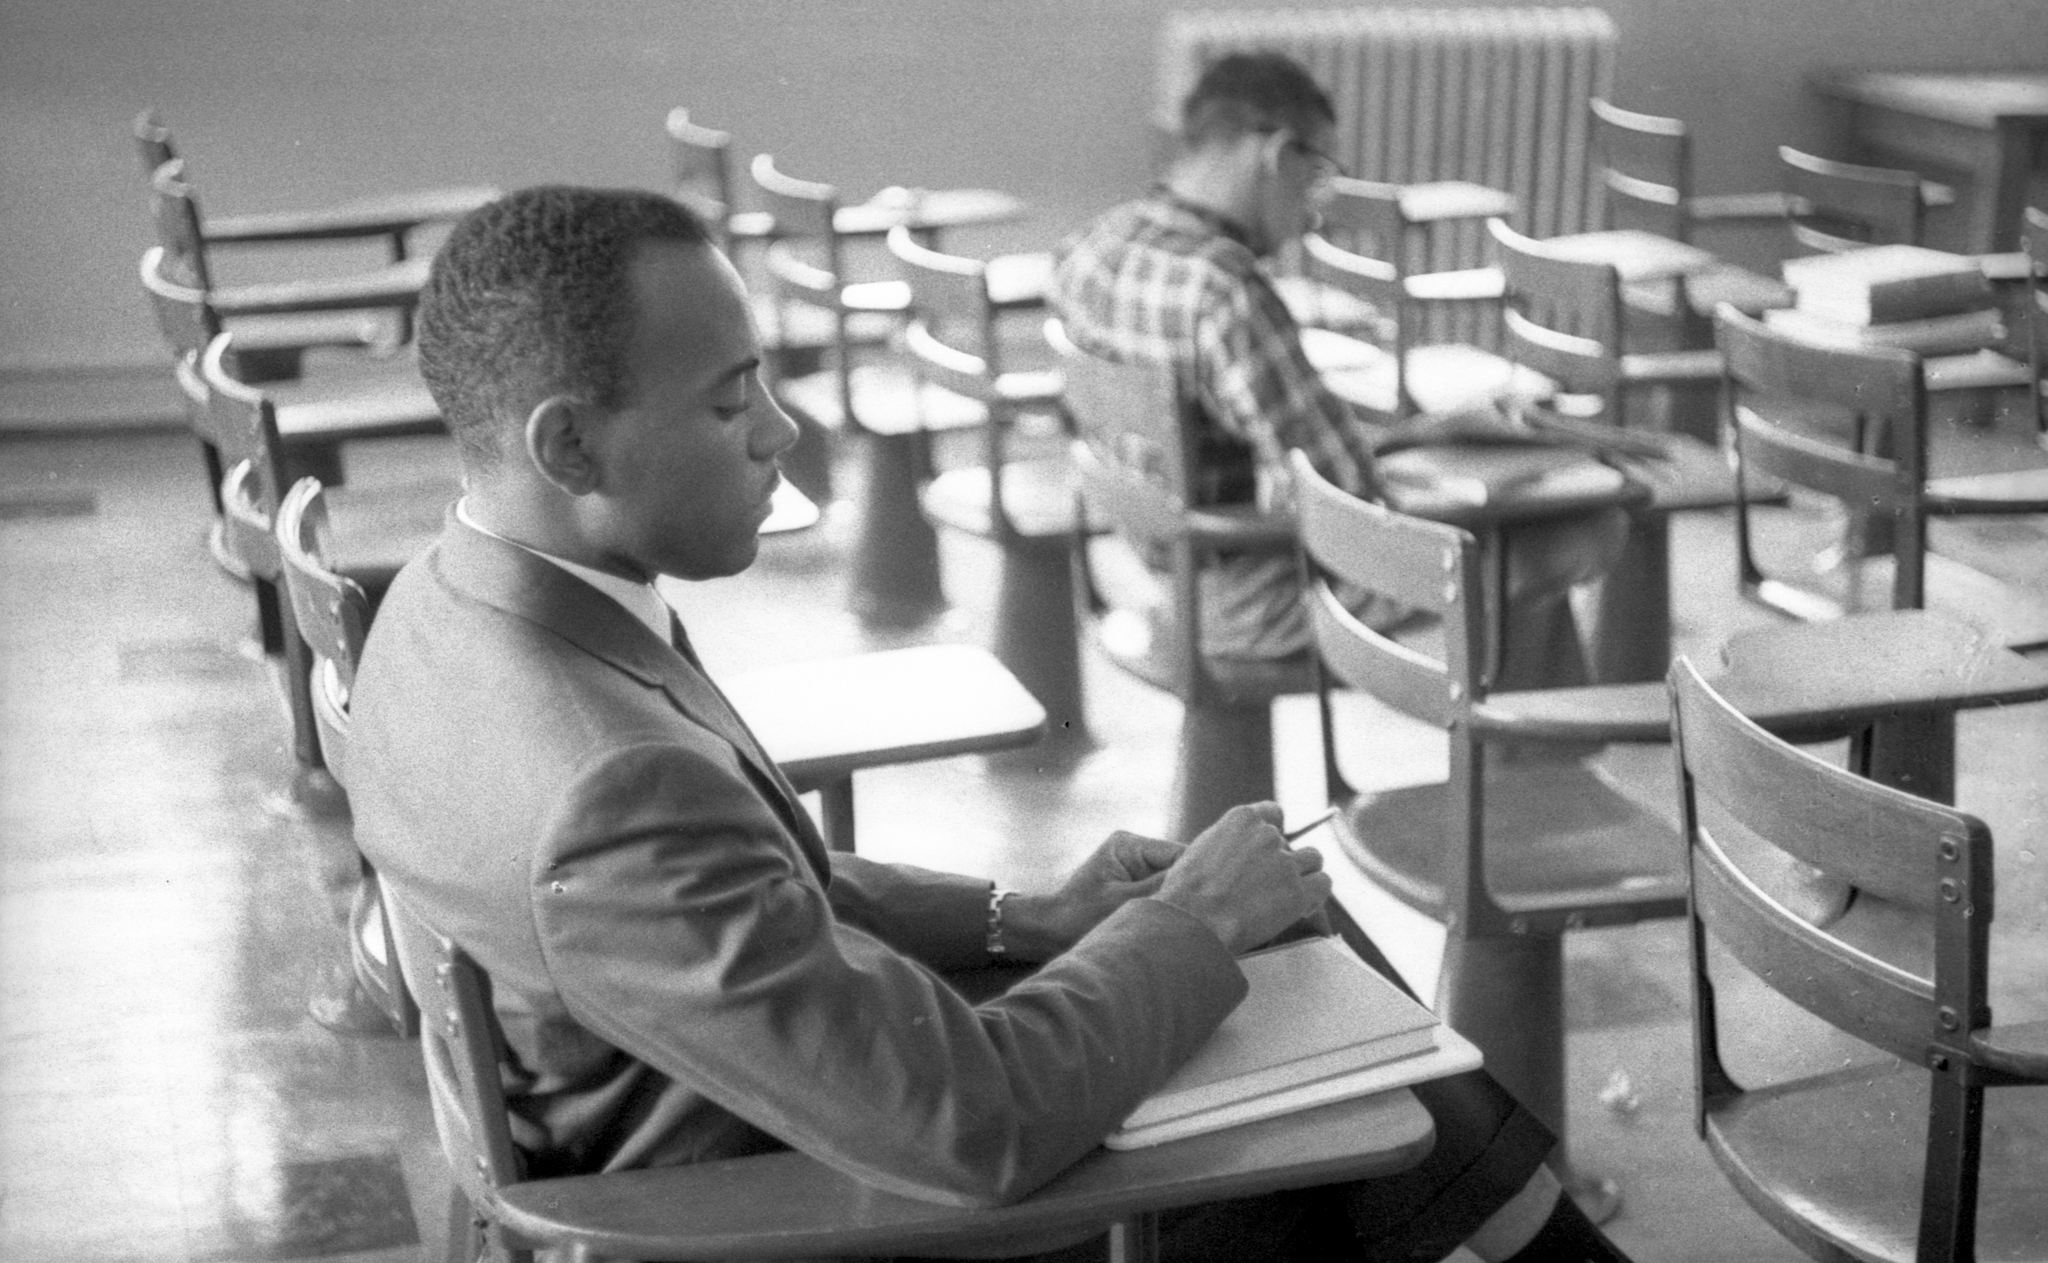 James Meredith seated in a classroom. Copyright of the Ed Meek Collection at the University of Mississippi: Integration of 1962. Joint ownership between Ed Meek, The University of Mississippi, The School of Journalism and New Media and The Department of Archives and Special Collections. 